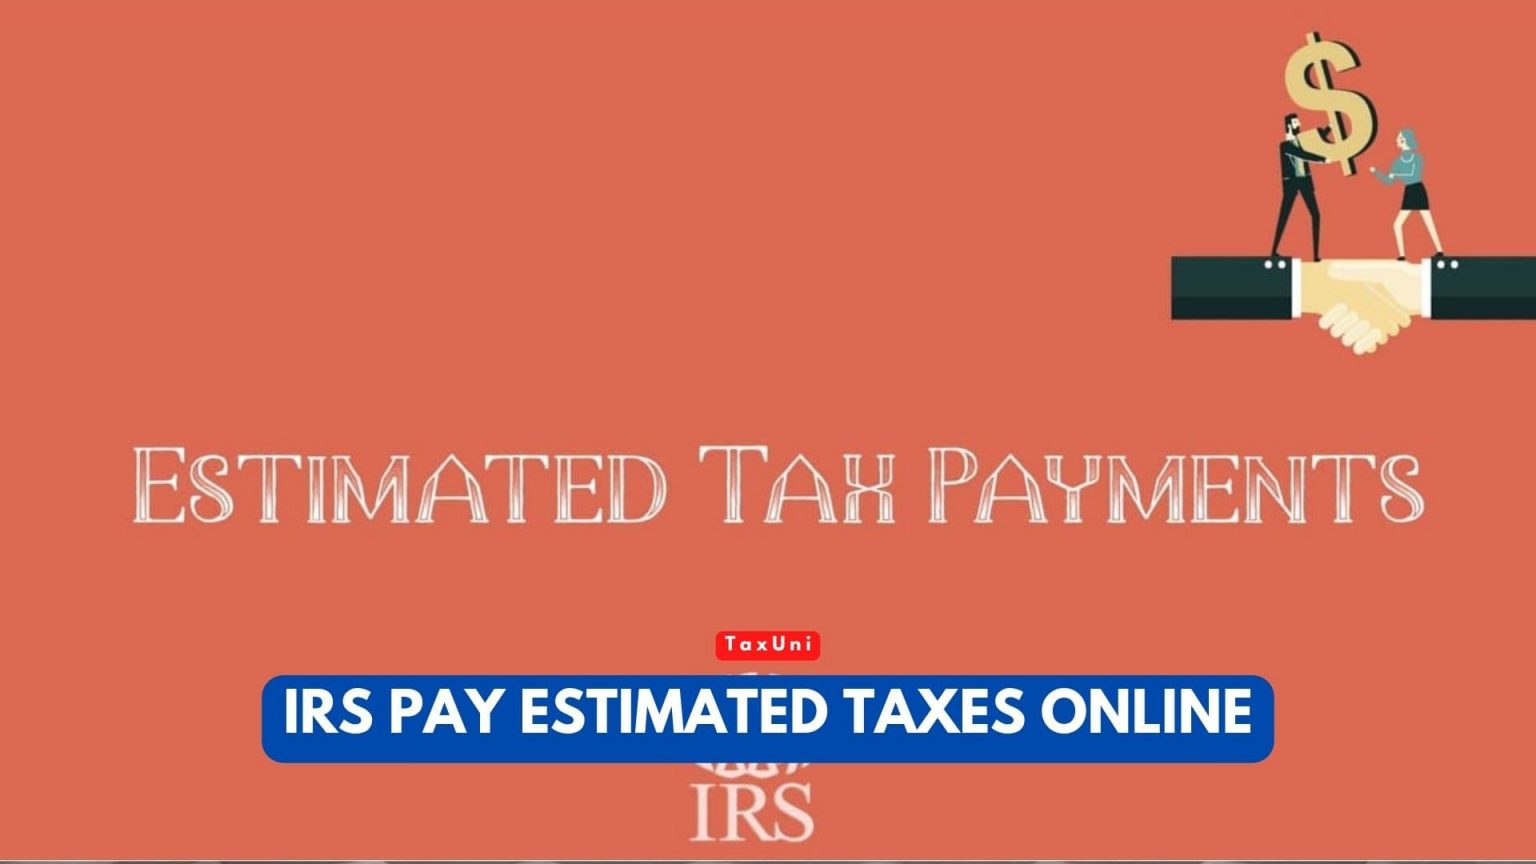 IRS Pay Estimated Taxes Online